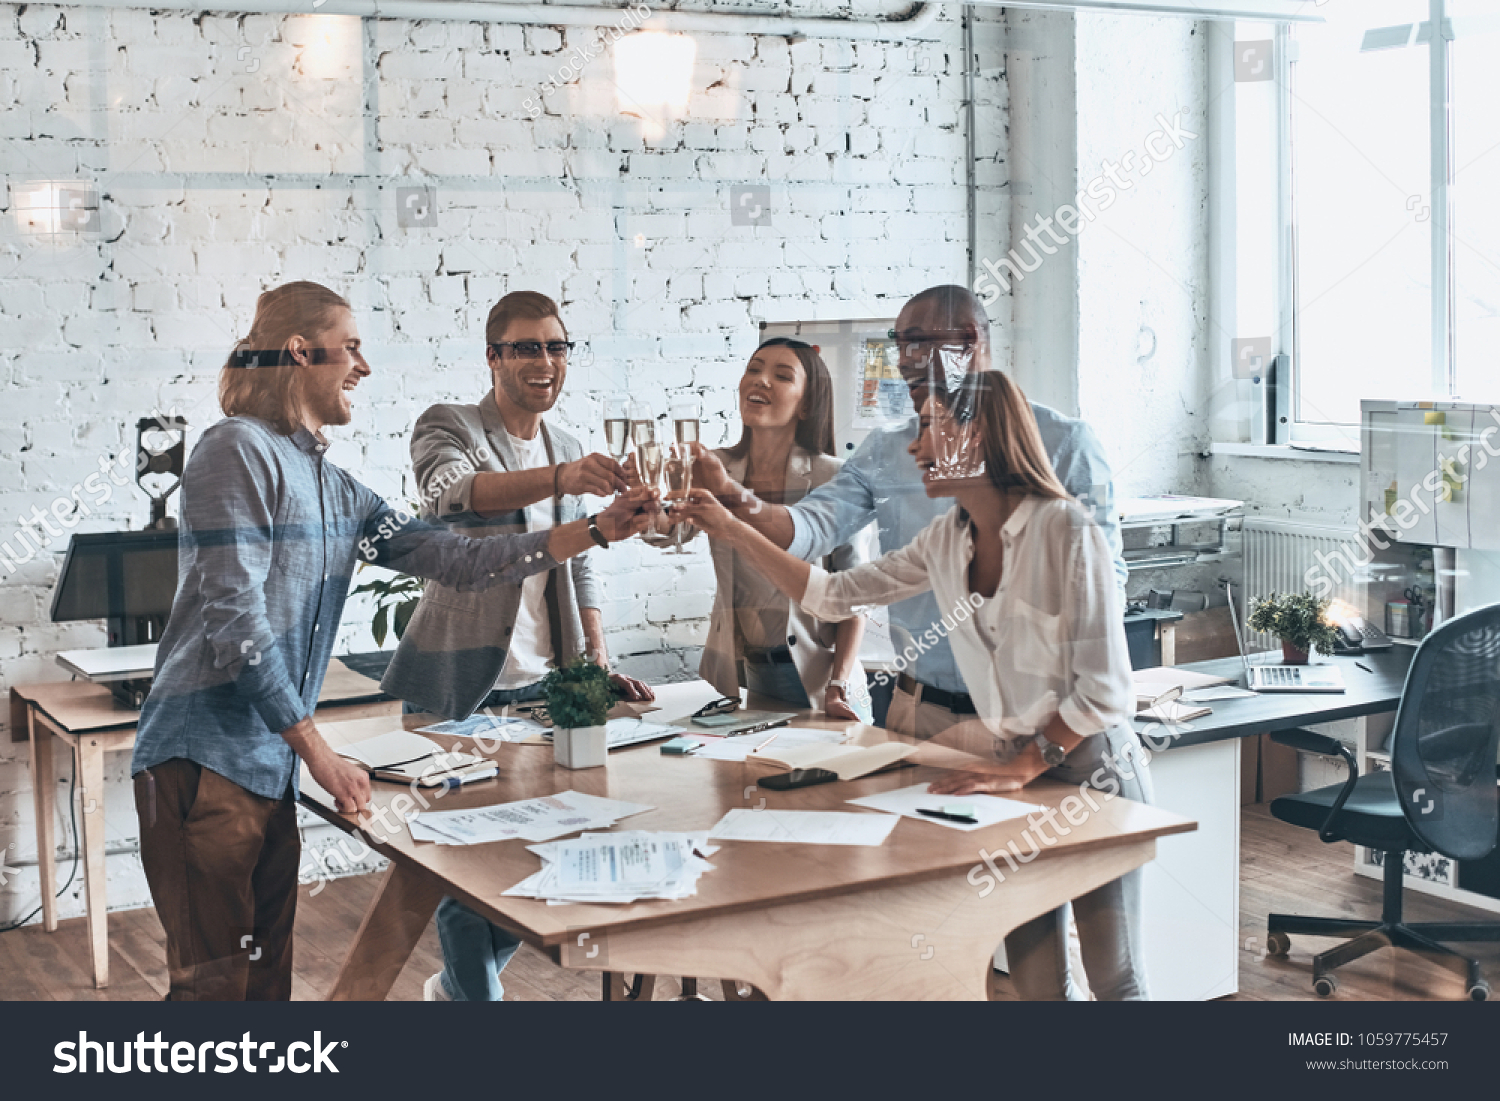 Toasting their success. Group of young business people toasting each other and smiling while standing behind the glass wall in the board room #1059775457